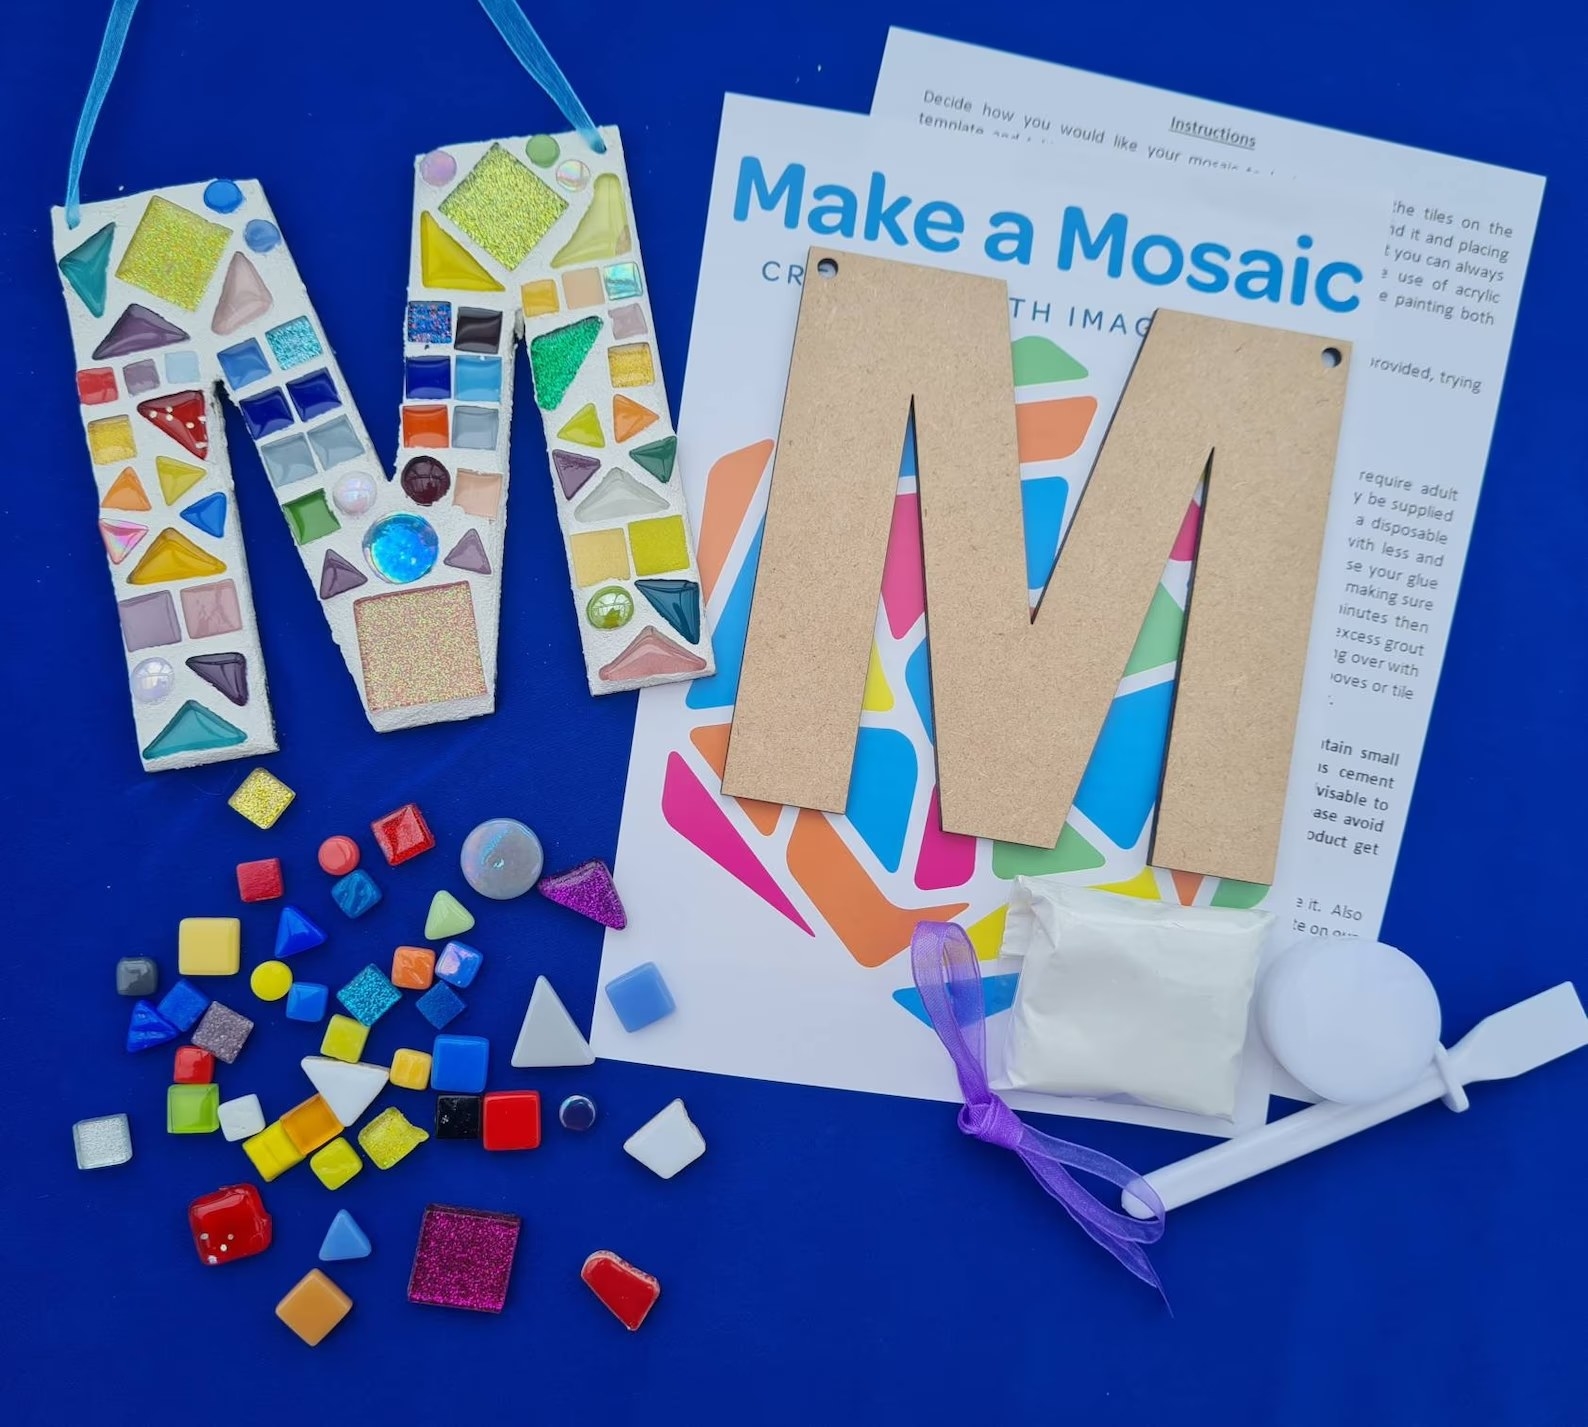 Complete mosaic letter craft kit using the letter M to show before and after results